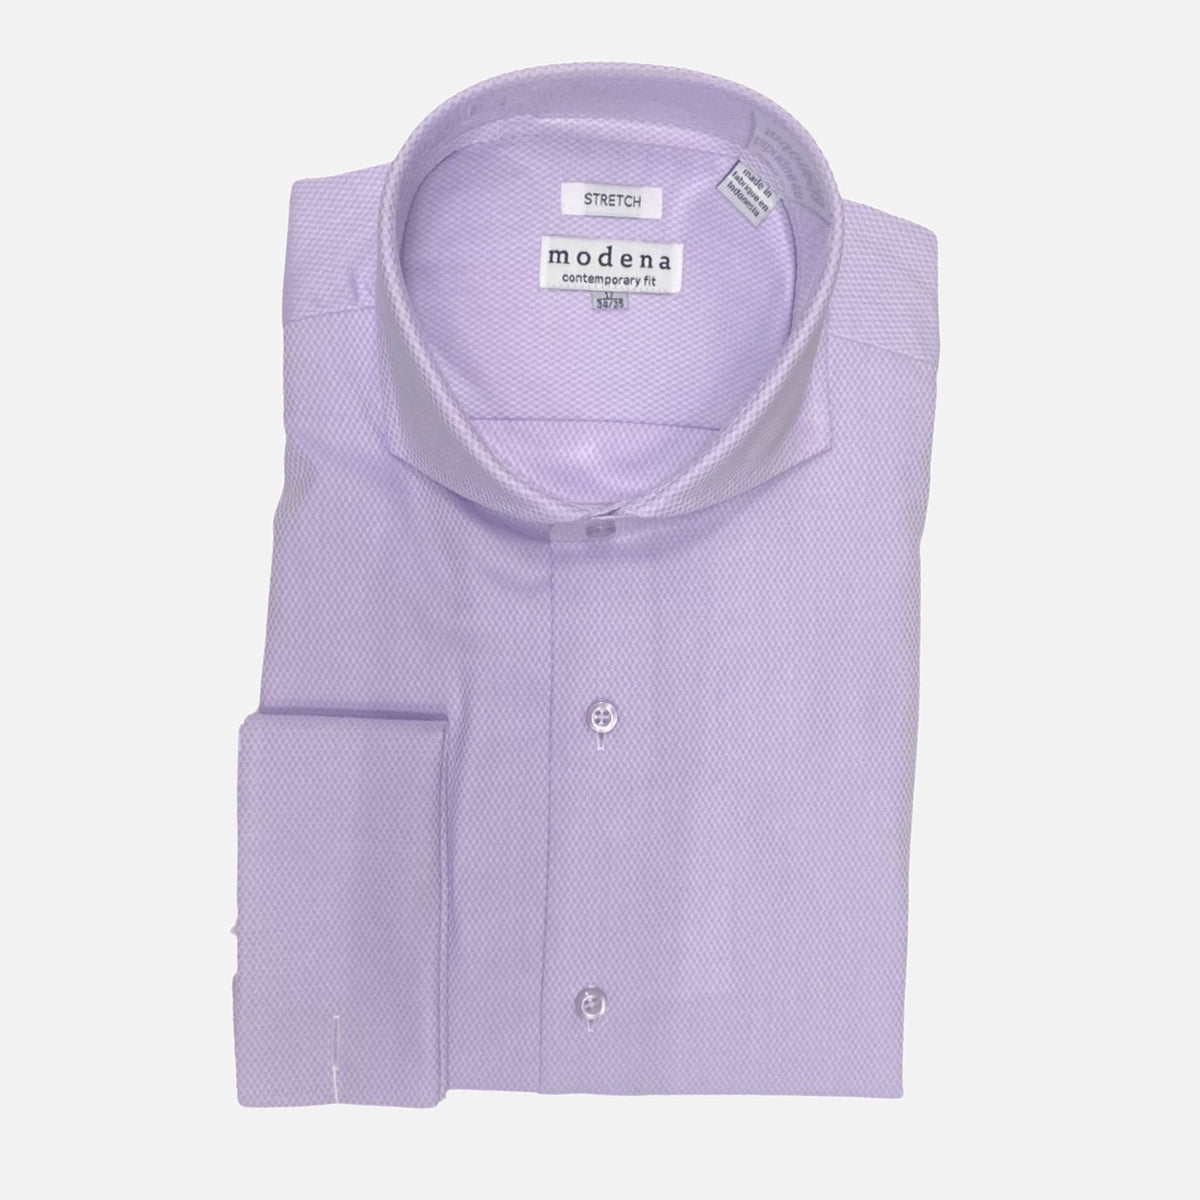 Men’s Lavender Dress Shirt wit French Cuff | Contemporary Fit